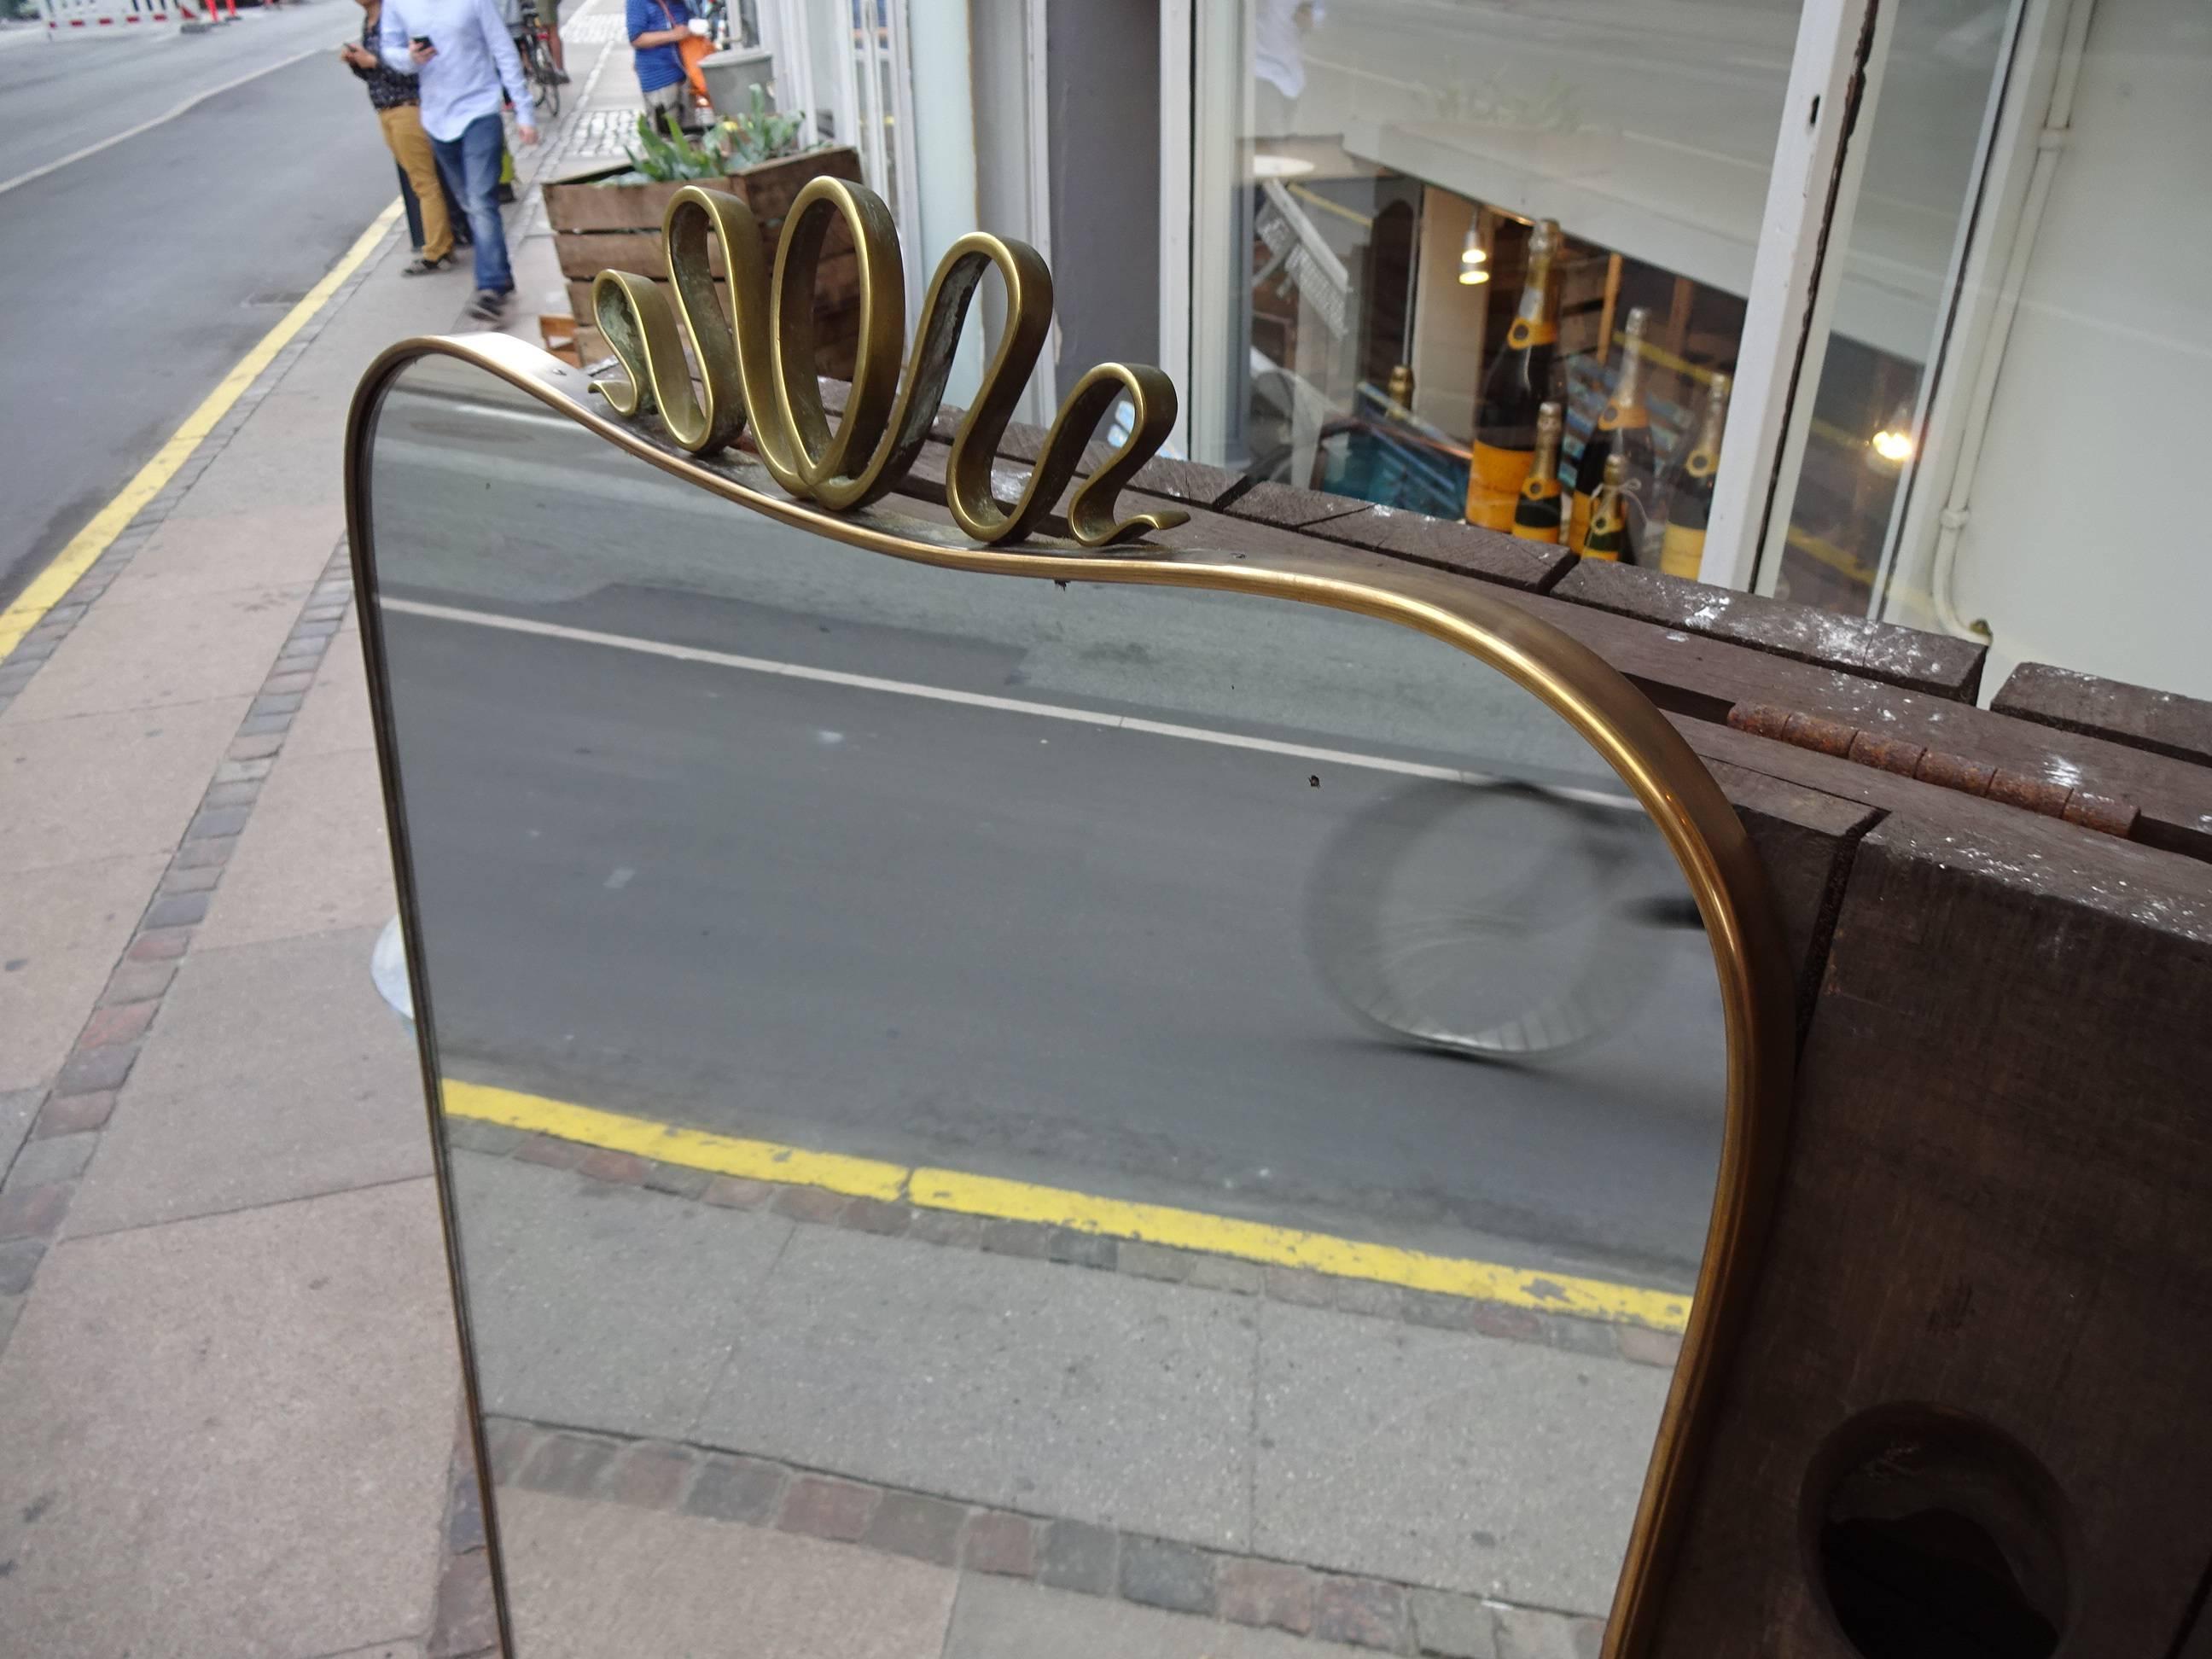 Large elongated Italian brass mirror from the 1950s and with a style akin to Gio Ponti mirrors. Original mirrored glass, and the brass frame has lovely patina. The stunning ornamental work at the top makes this item a unique piece indeed.